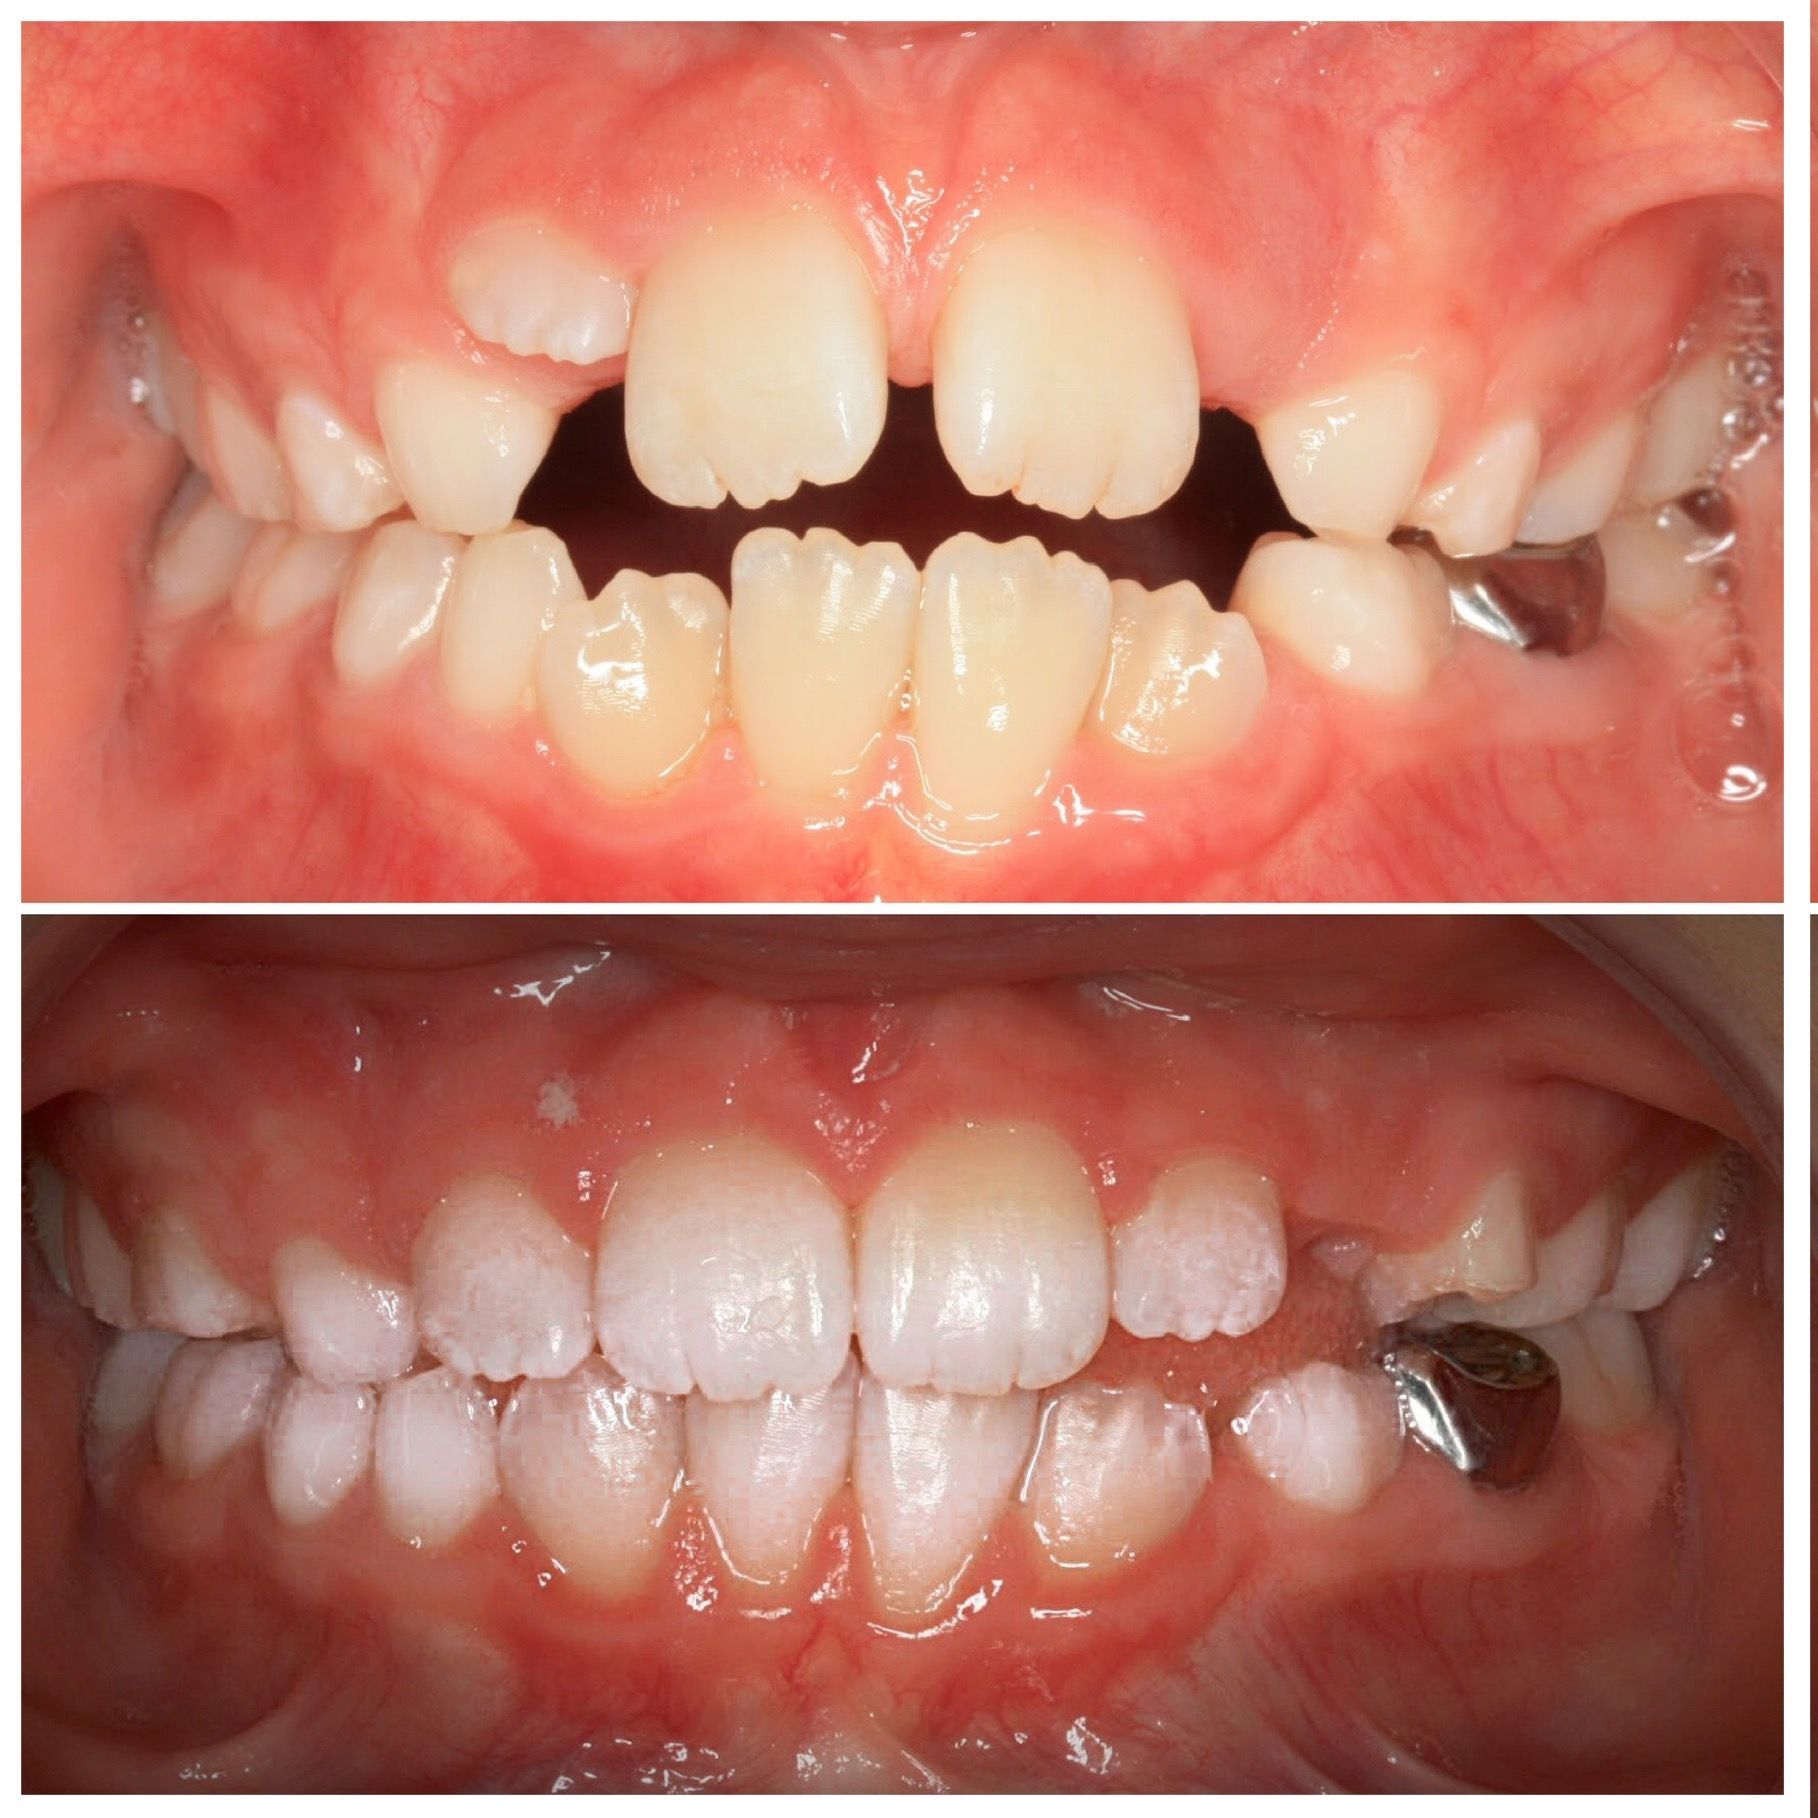 A before and after picture of a child 's teeth